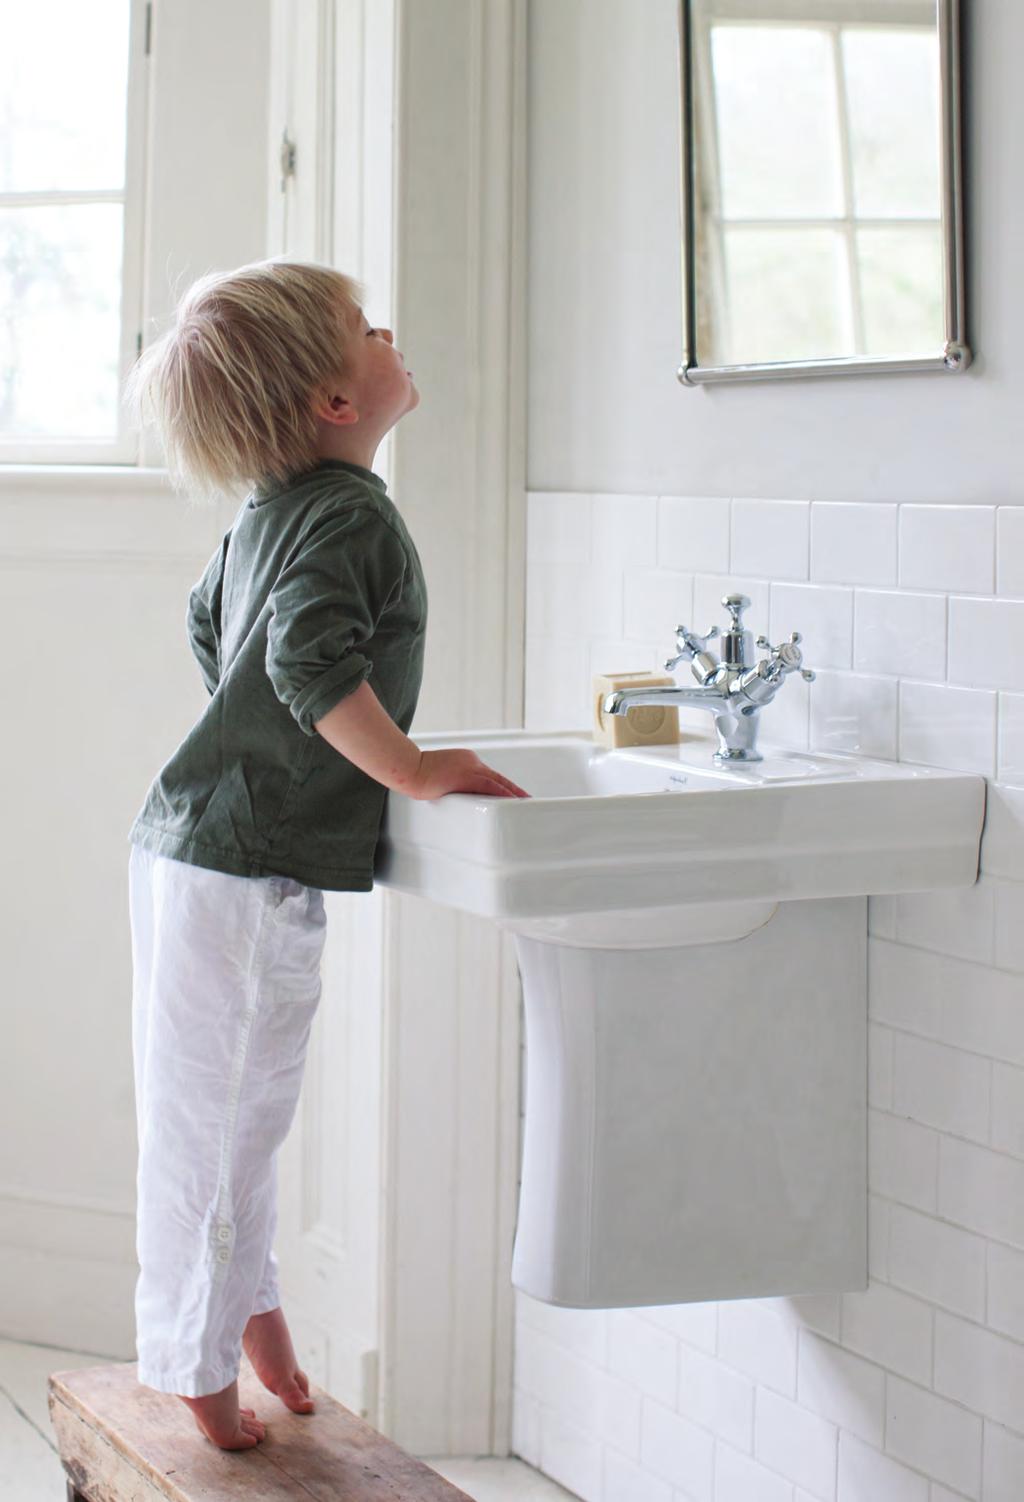 To order the correct basin configuration Simply remove the z and replace it with 1TH, 2TH or 3TH.